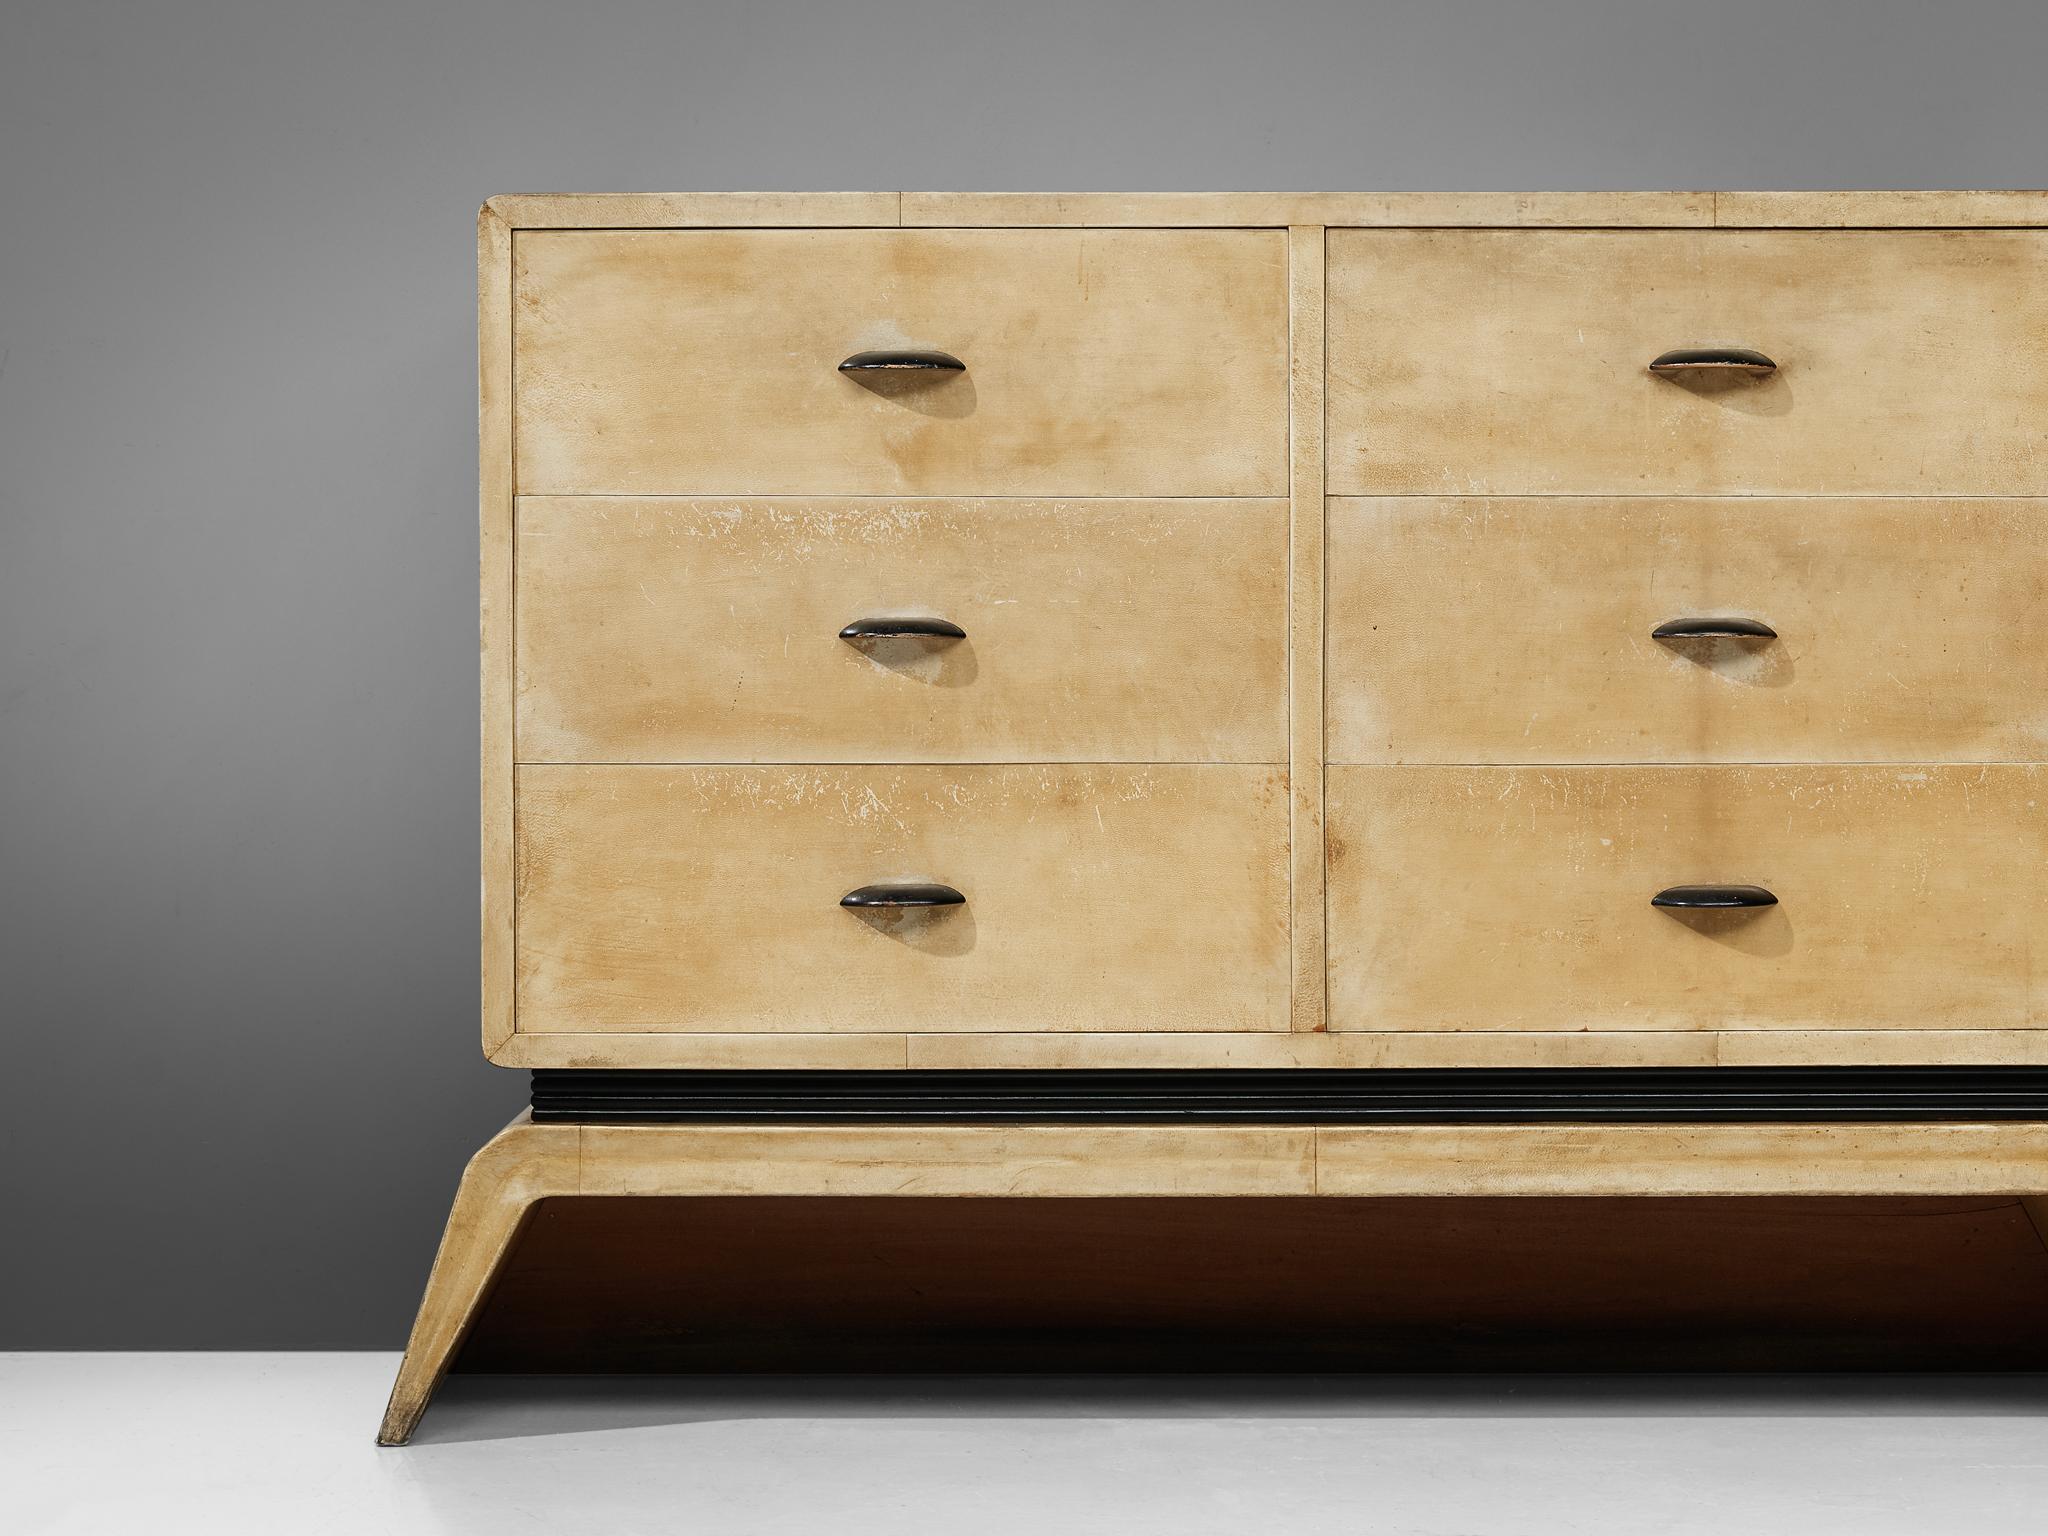 Valzania, sideboard, parchment, ebonized wood, Italy, 1940s

Rare sideboard with six drawers designed and created by Valzania in the 1940s. The sideboard is fully covered in a light parchment with a beautiful patina. The cabinets are lifted by